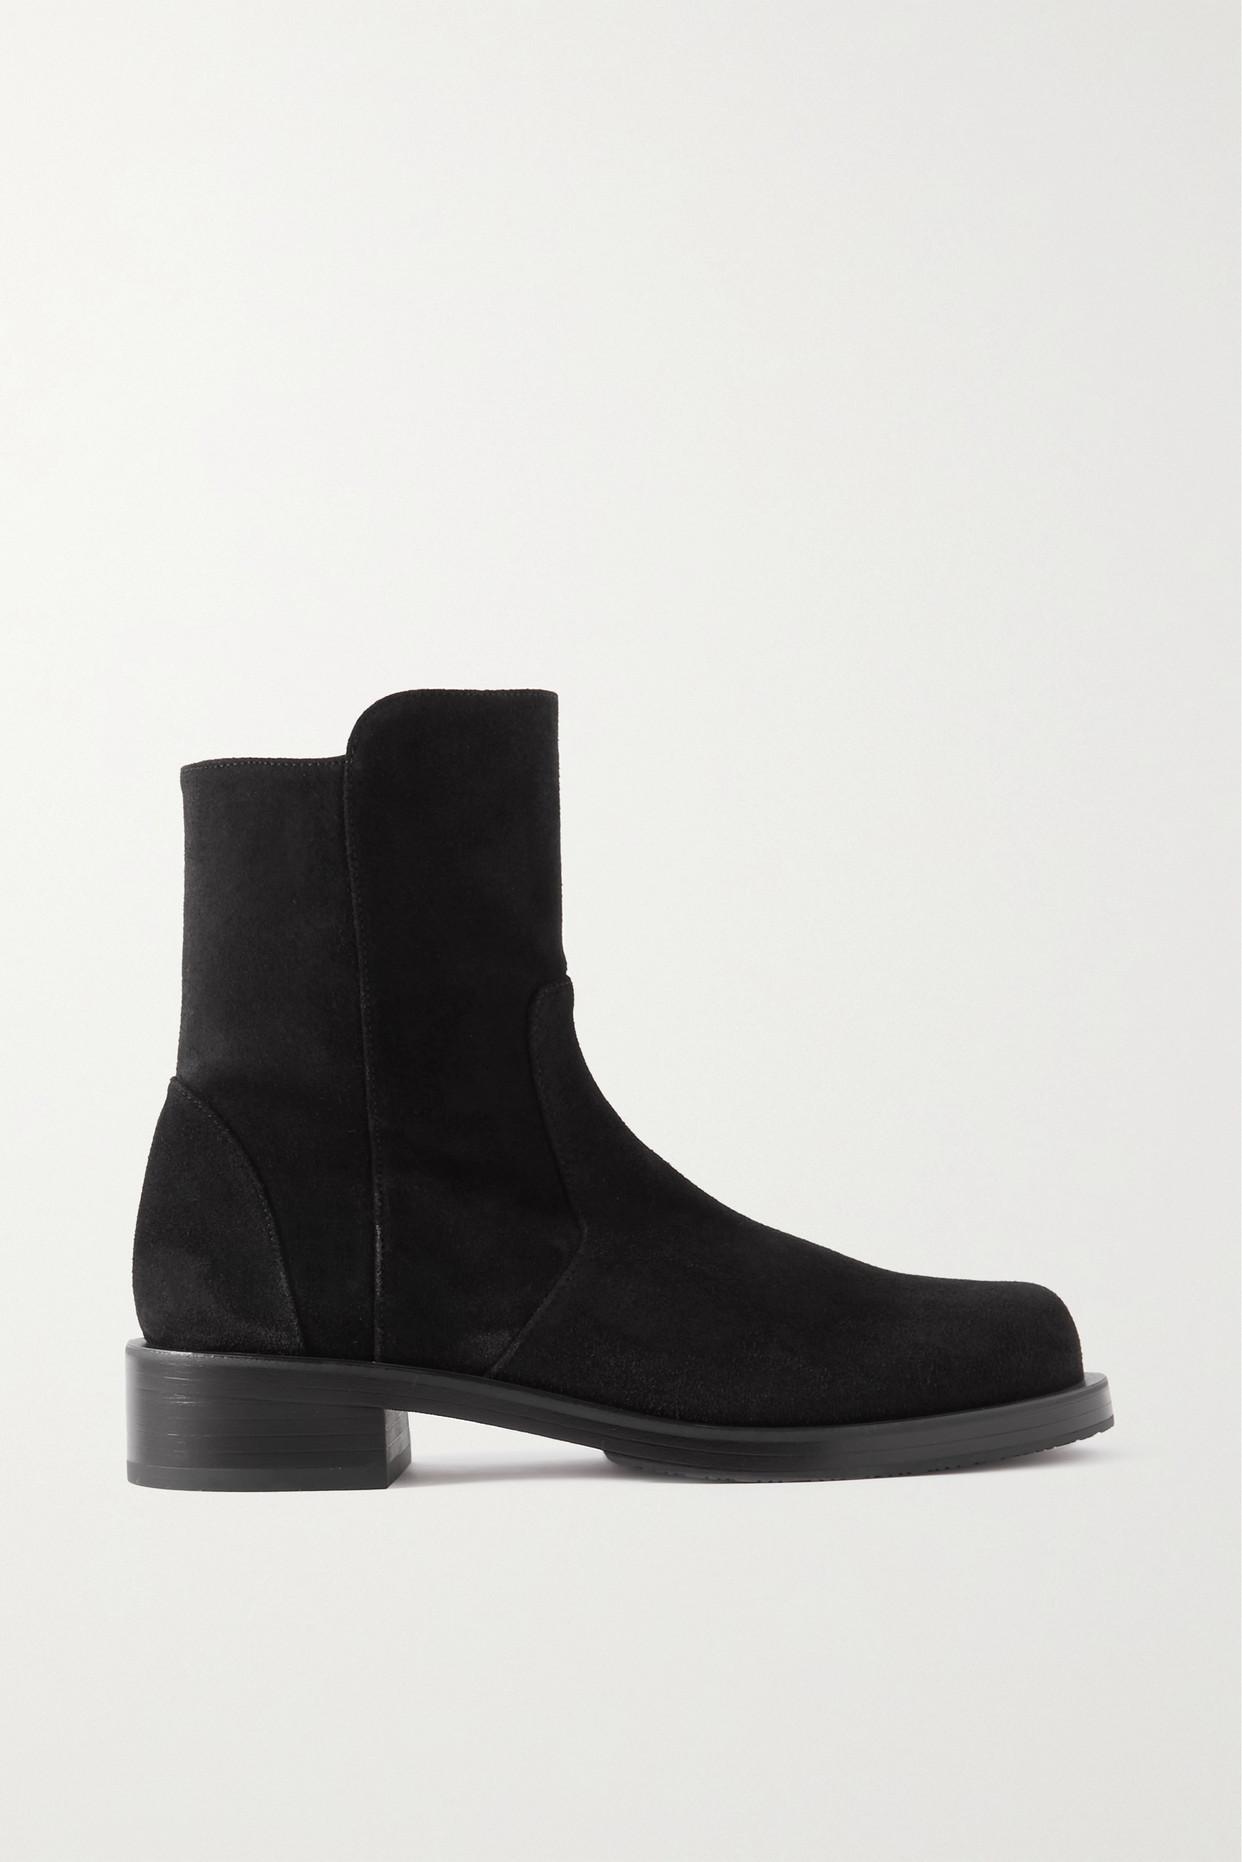 Stuart Weitzman 5050 Bold Suede Ankle Boots in Black | Lyst